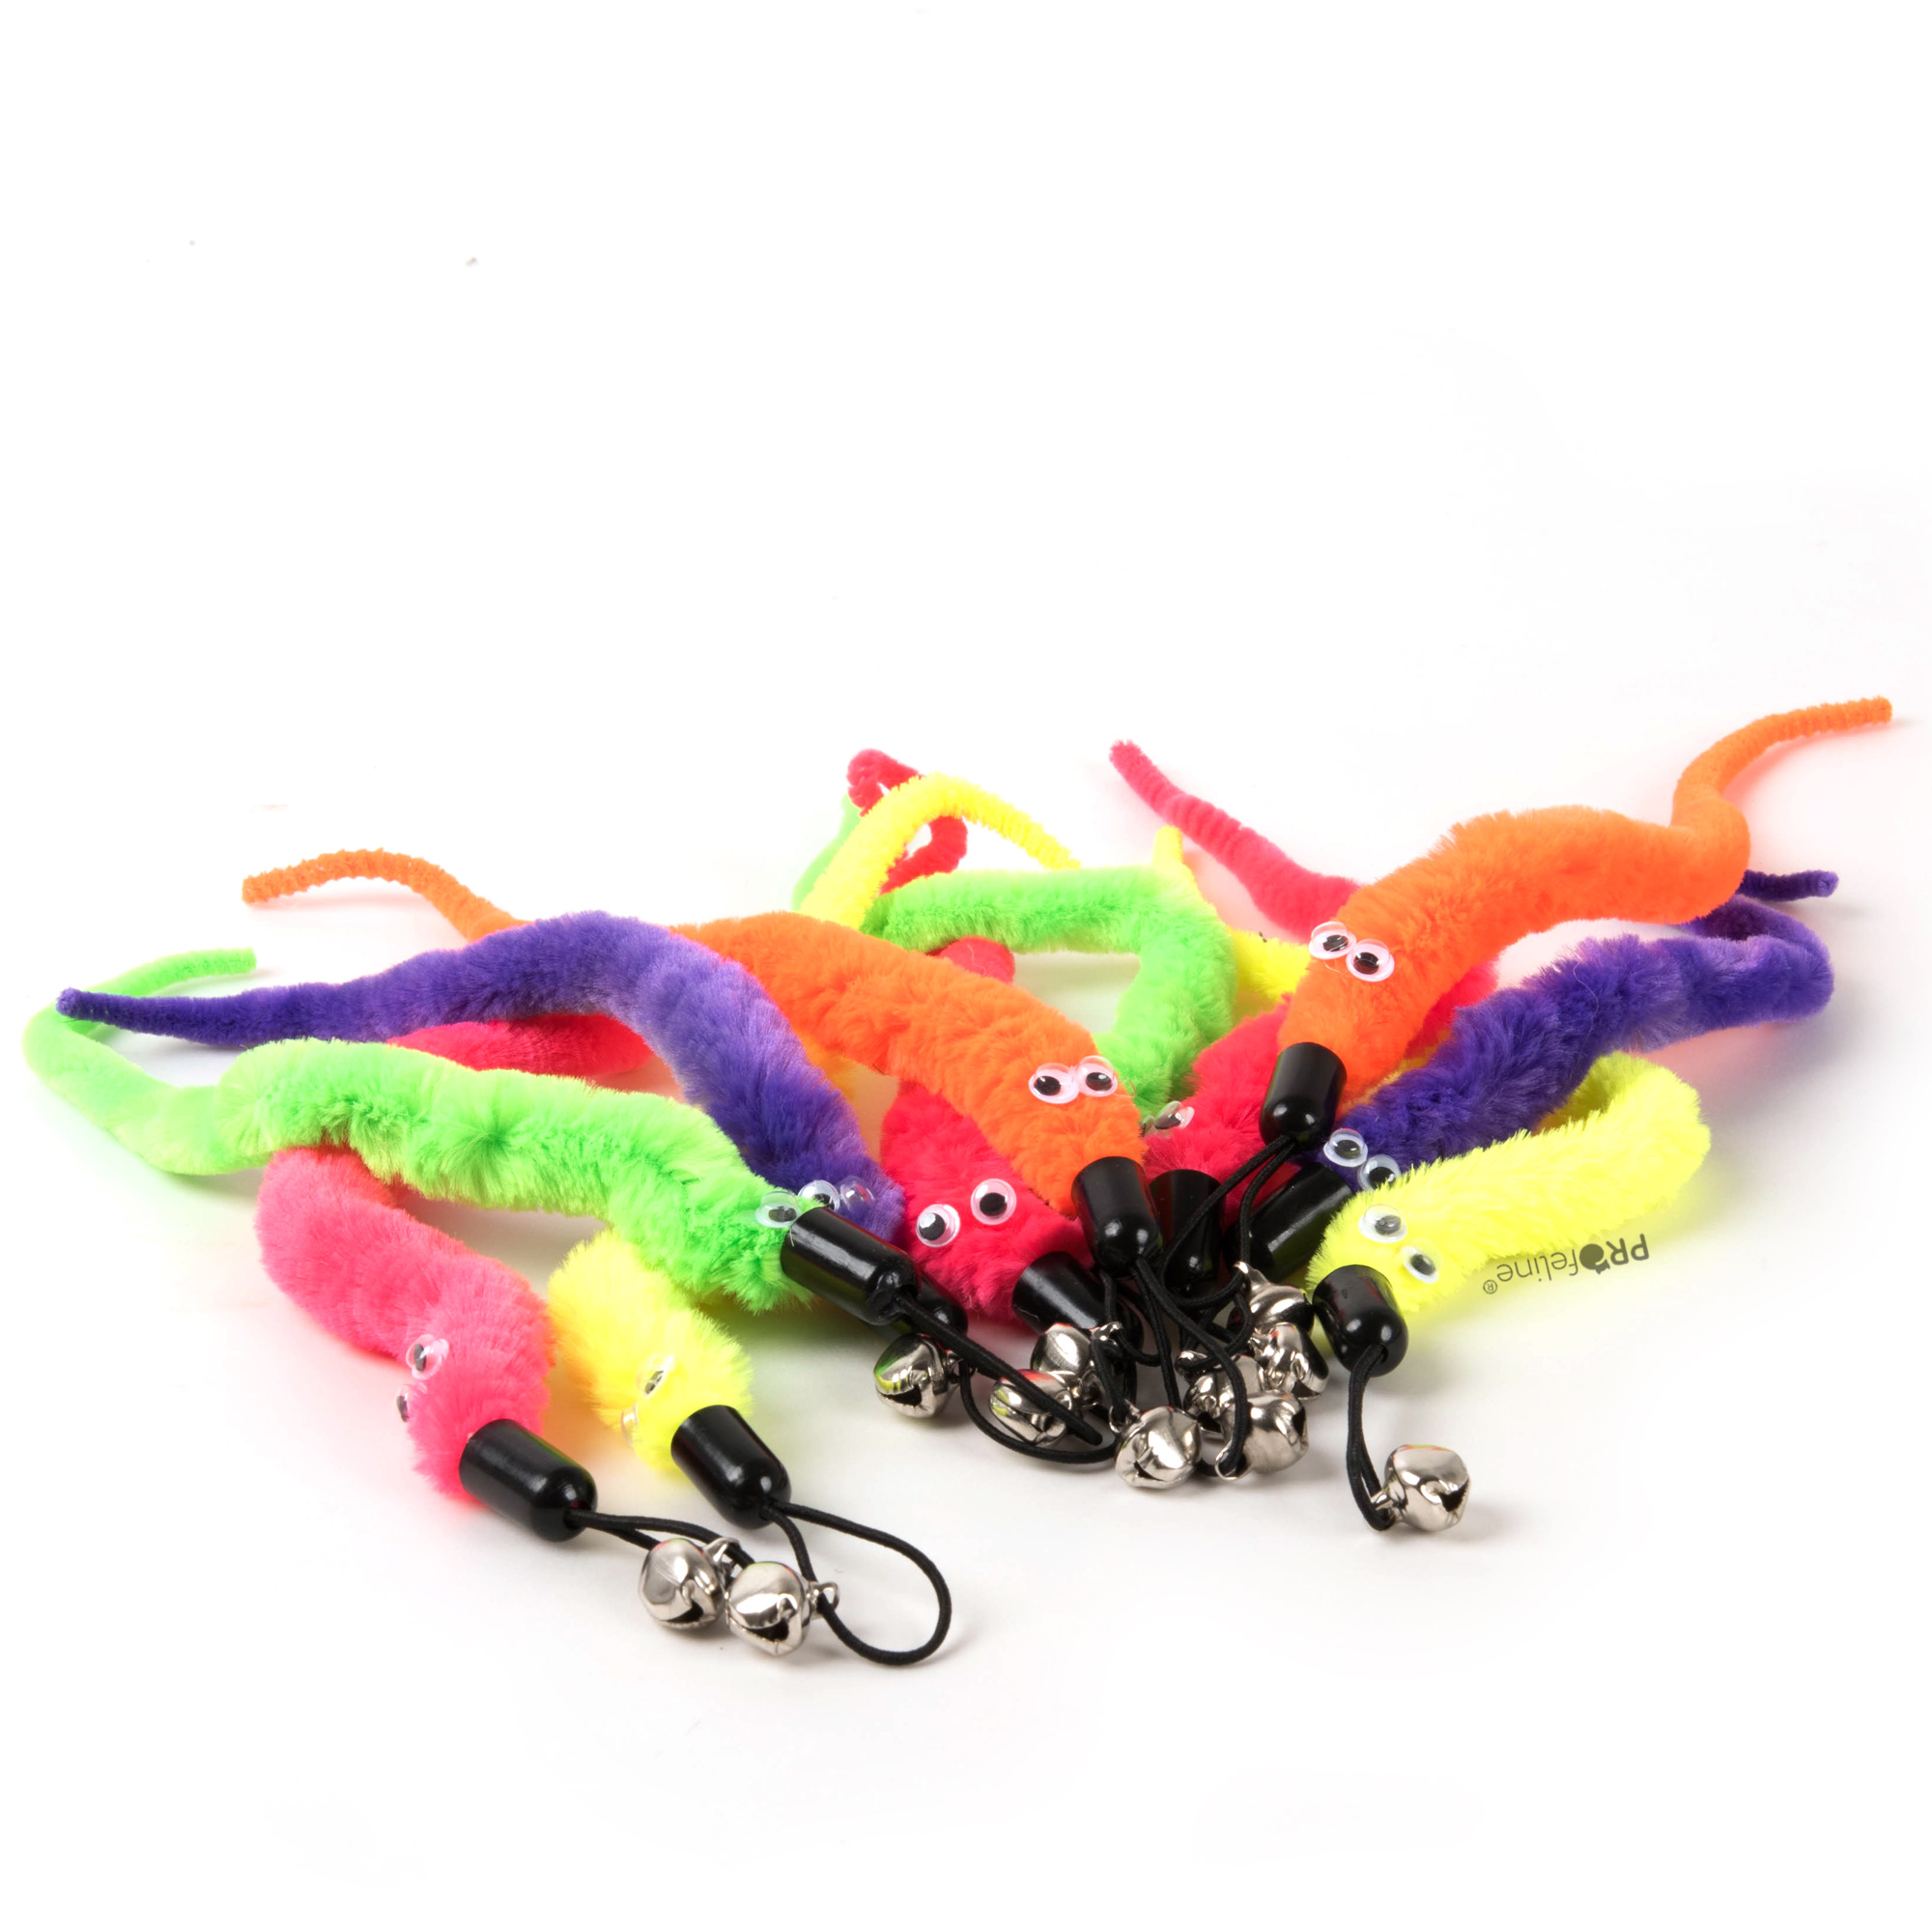 Freaky Worm - funny plush attachment for cat rods.